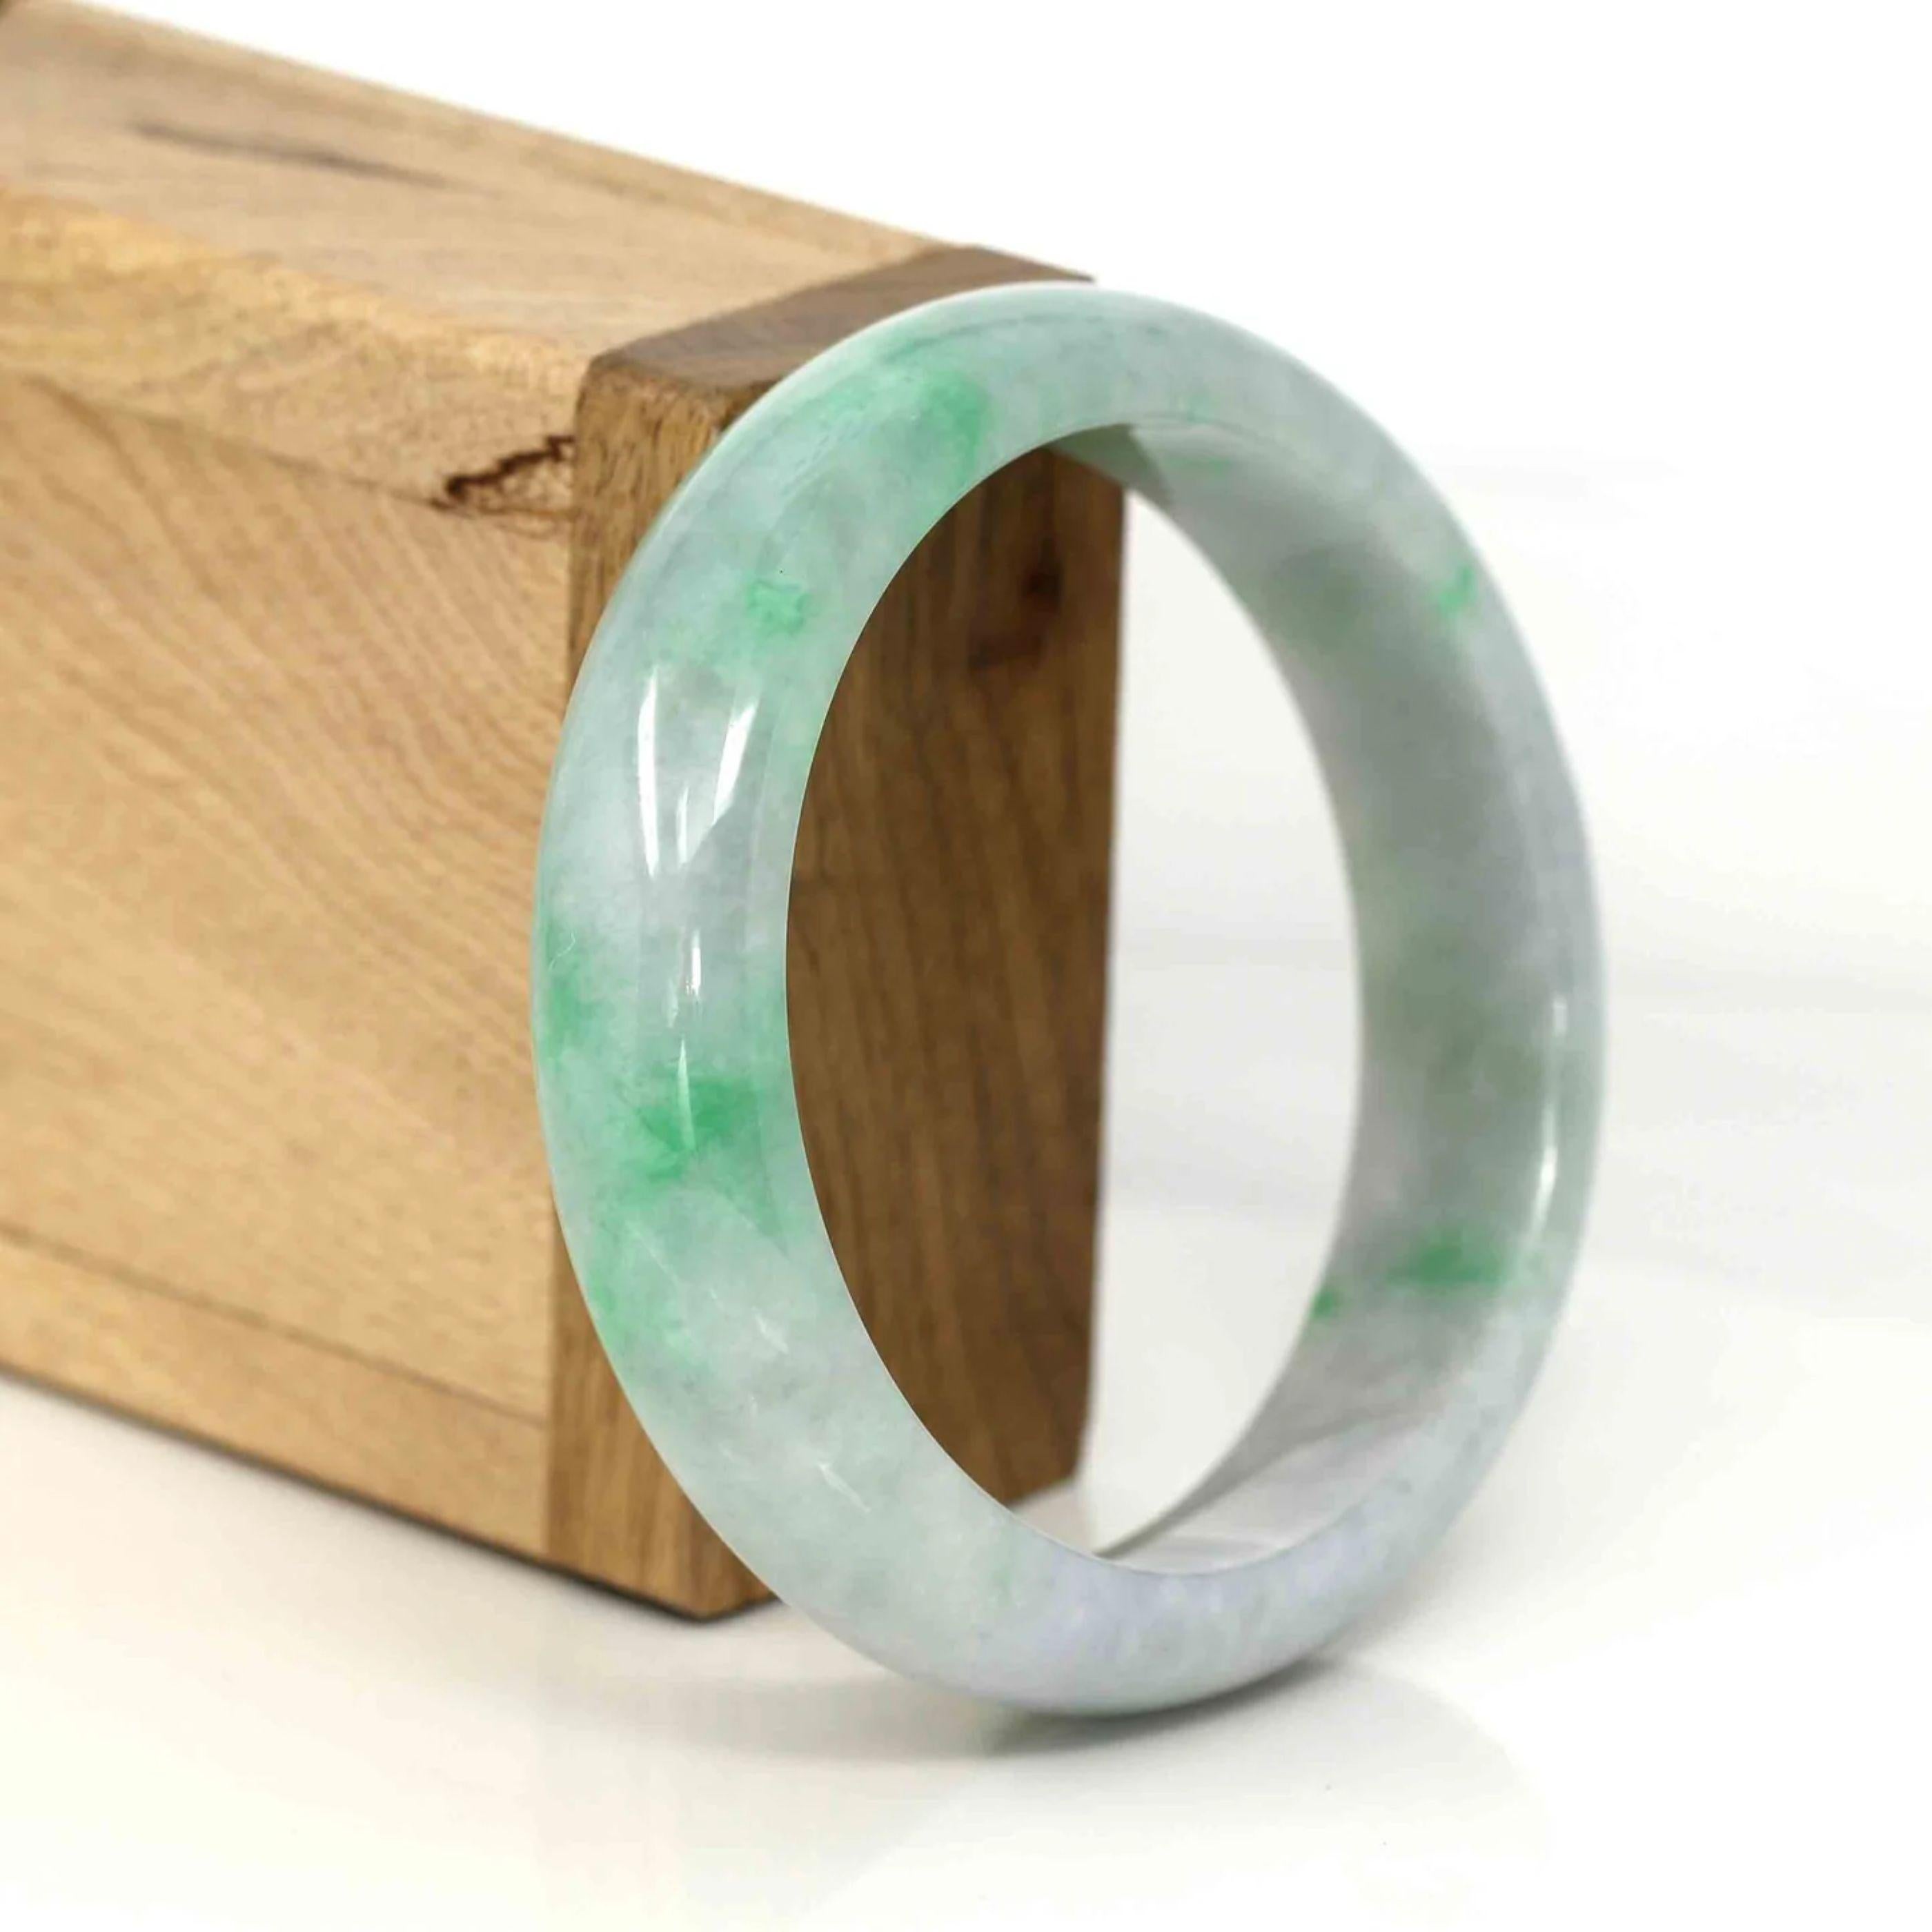 * DETAILS--- Genuine Burmese Jadeite Jade Bangle Bracelet. This bangle is made with fine genuine Burmese Jadeite jade. The jade texture is very good and smooth with green-lavender color. The color is beautiful, Just has some clouds as SI Diamond.